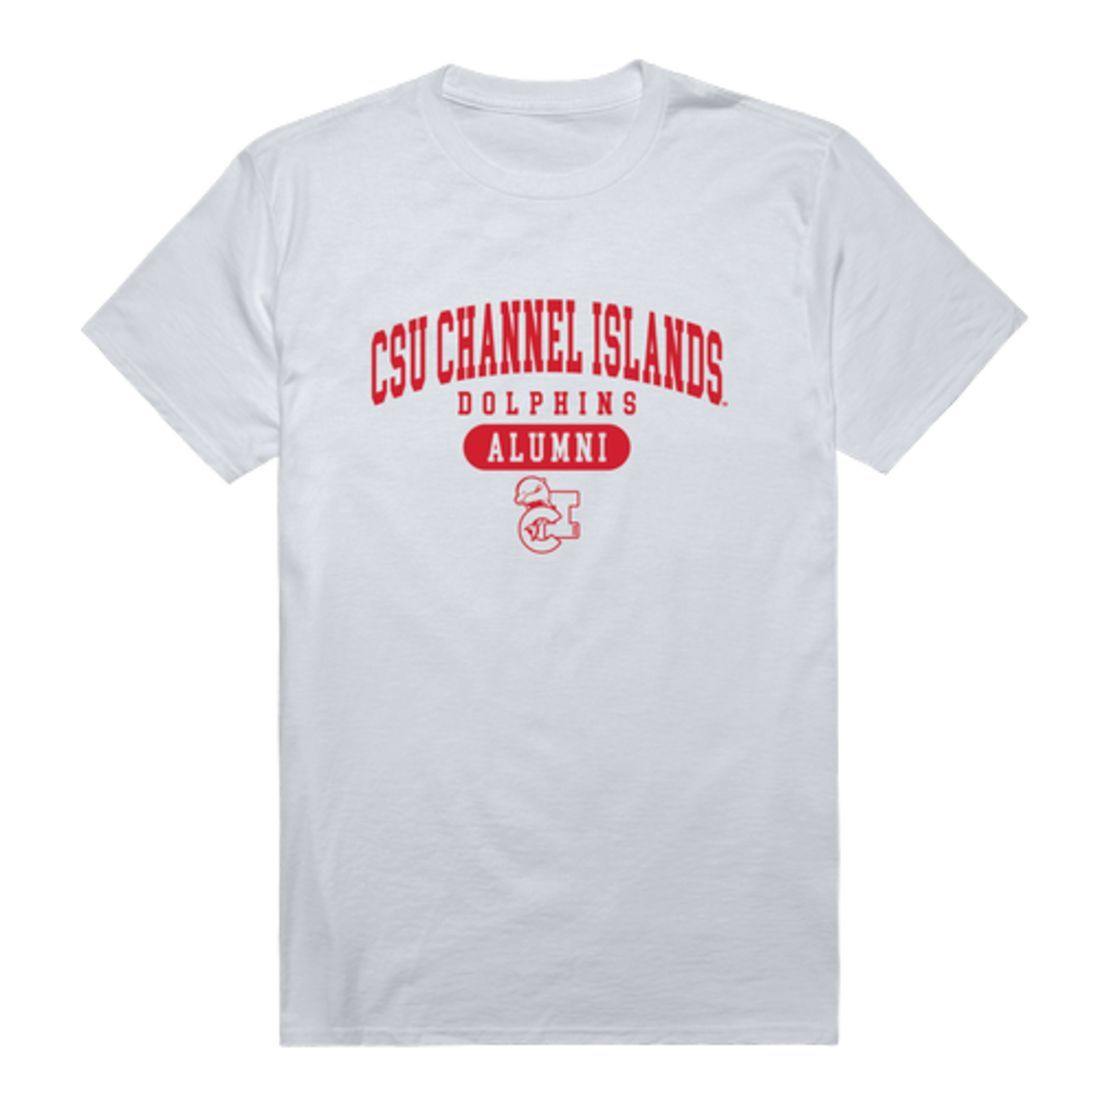 CSUCI California State University Channel Islands The Dolphins Alumni Tee T-Shirt-Campus-Wardrobe